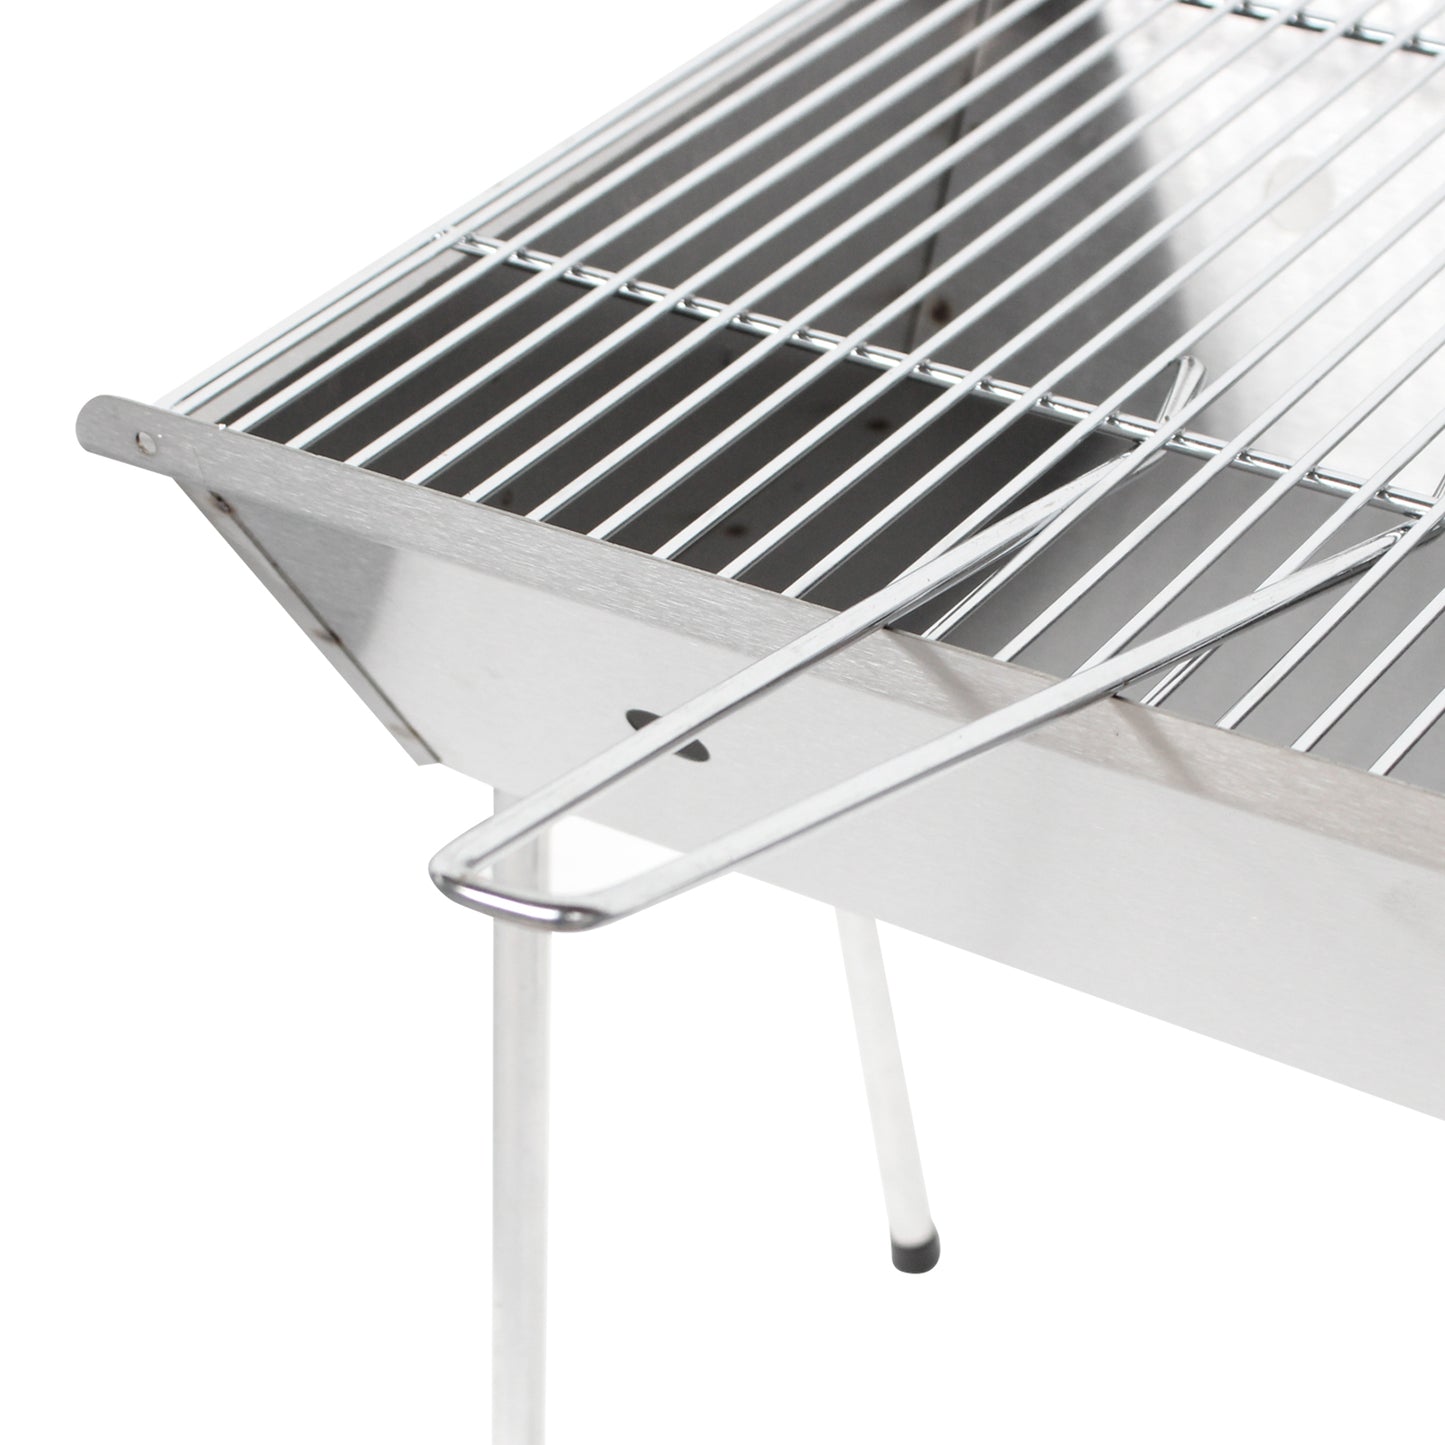 Econo Braai Charcoal Barbecue Grilling Space